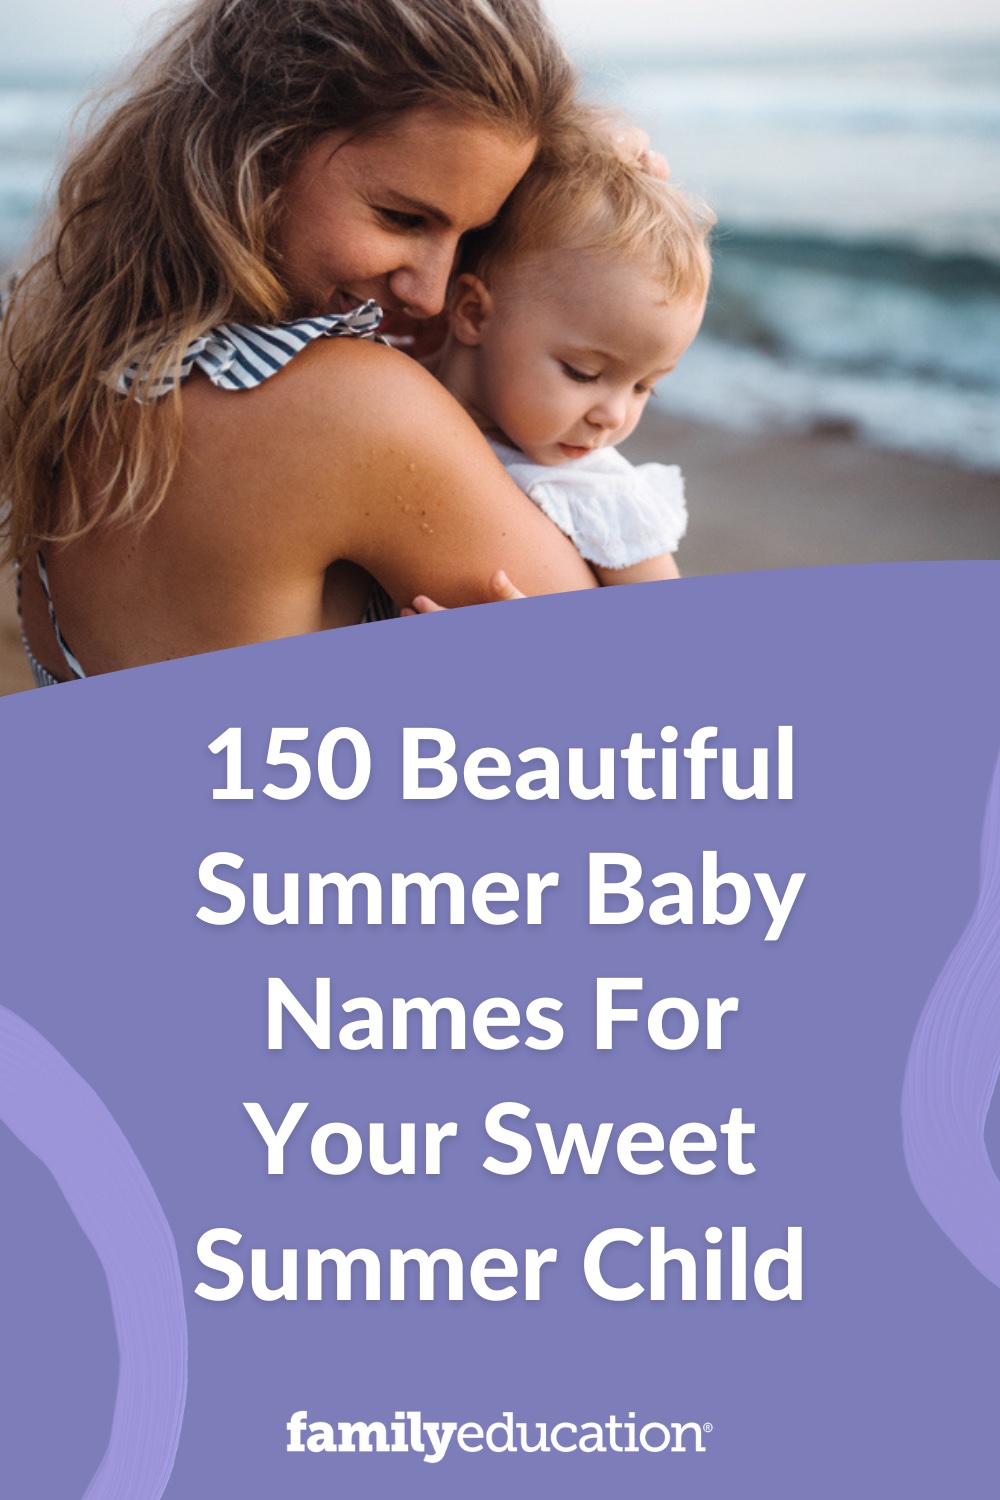 150 Beautiful Summer Baby Names For Your Sweet Summer Child